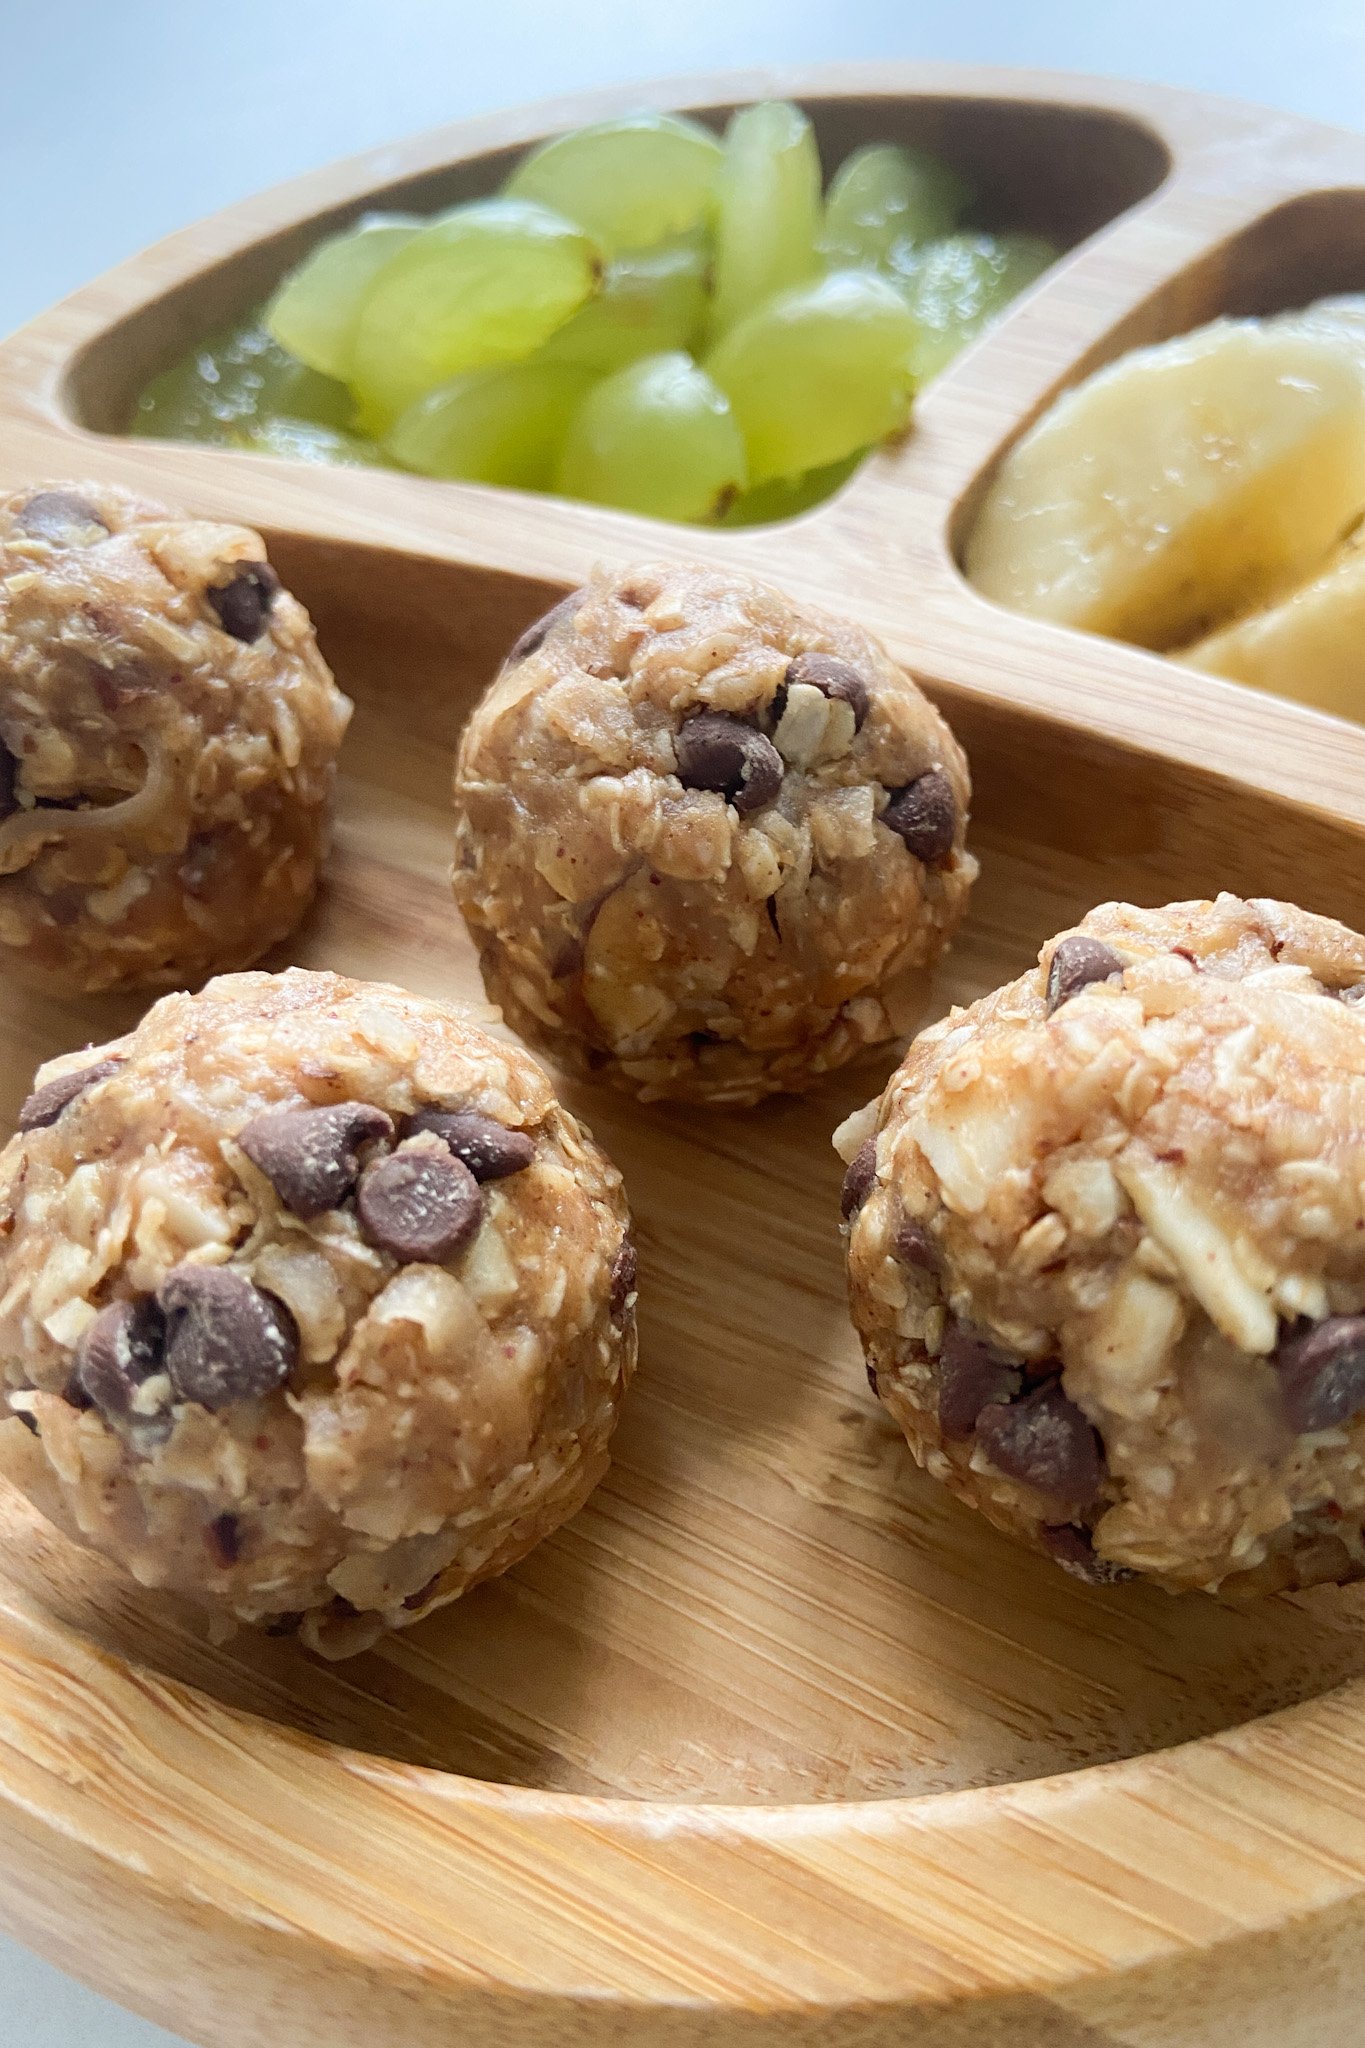 Granola balls served with fruits